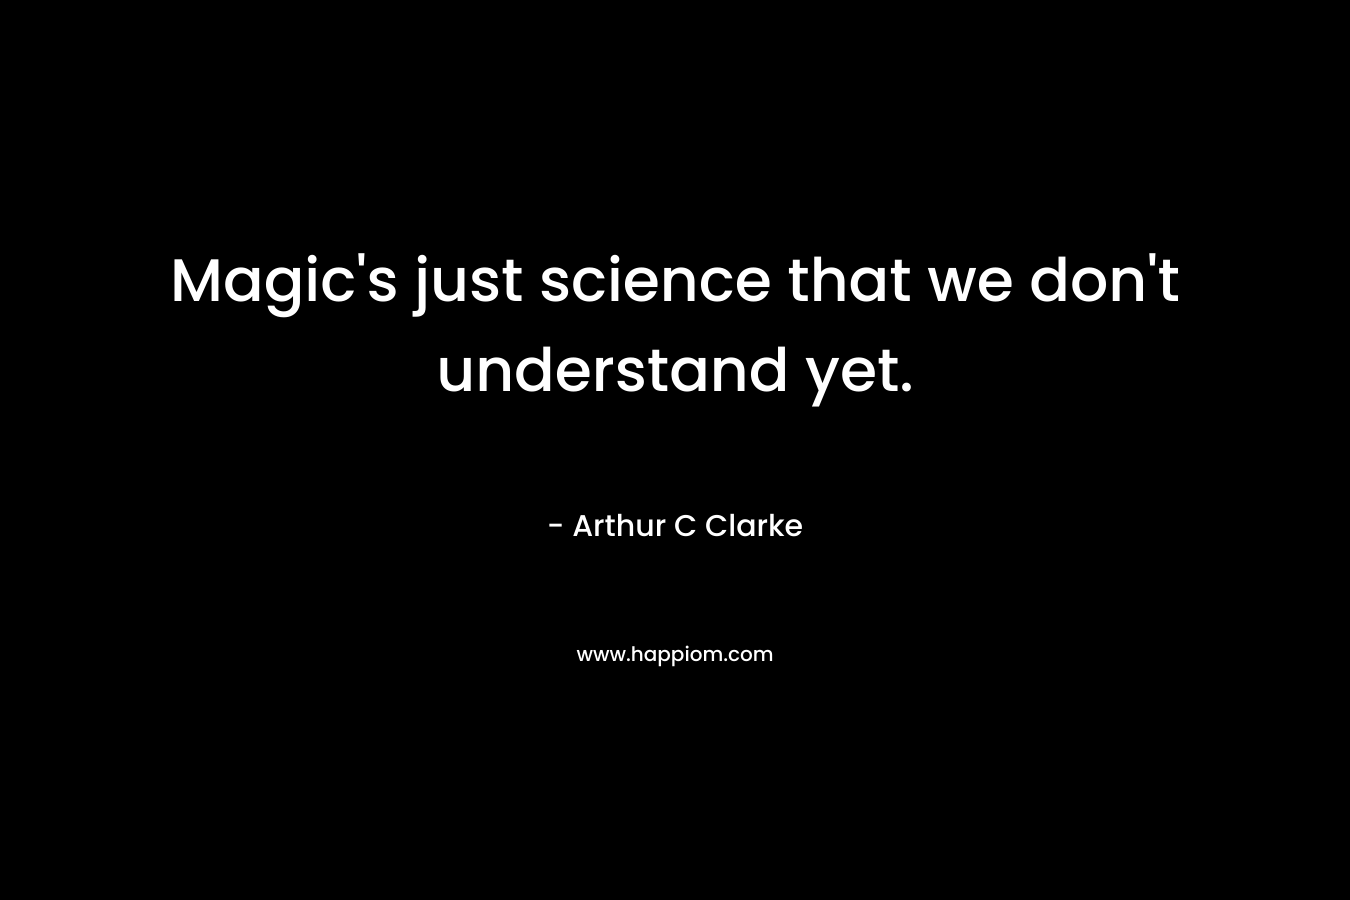 Magic's just science that we don't understand yet.